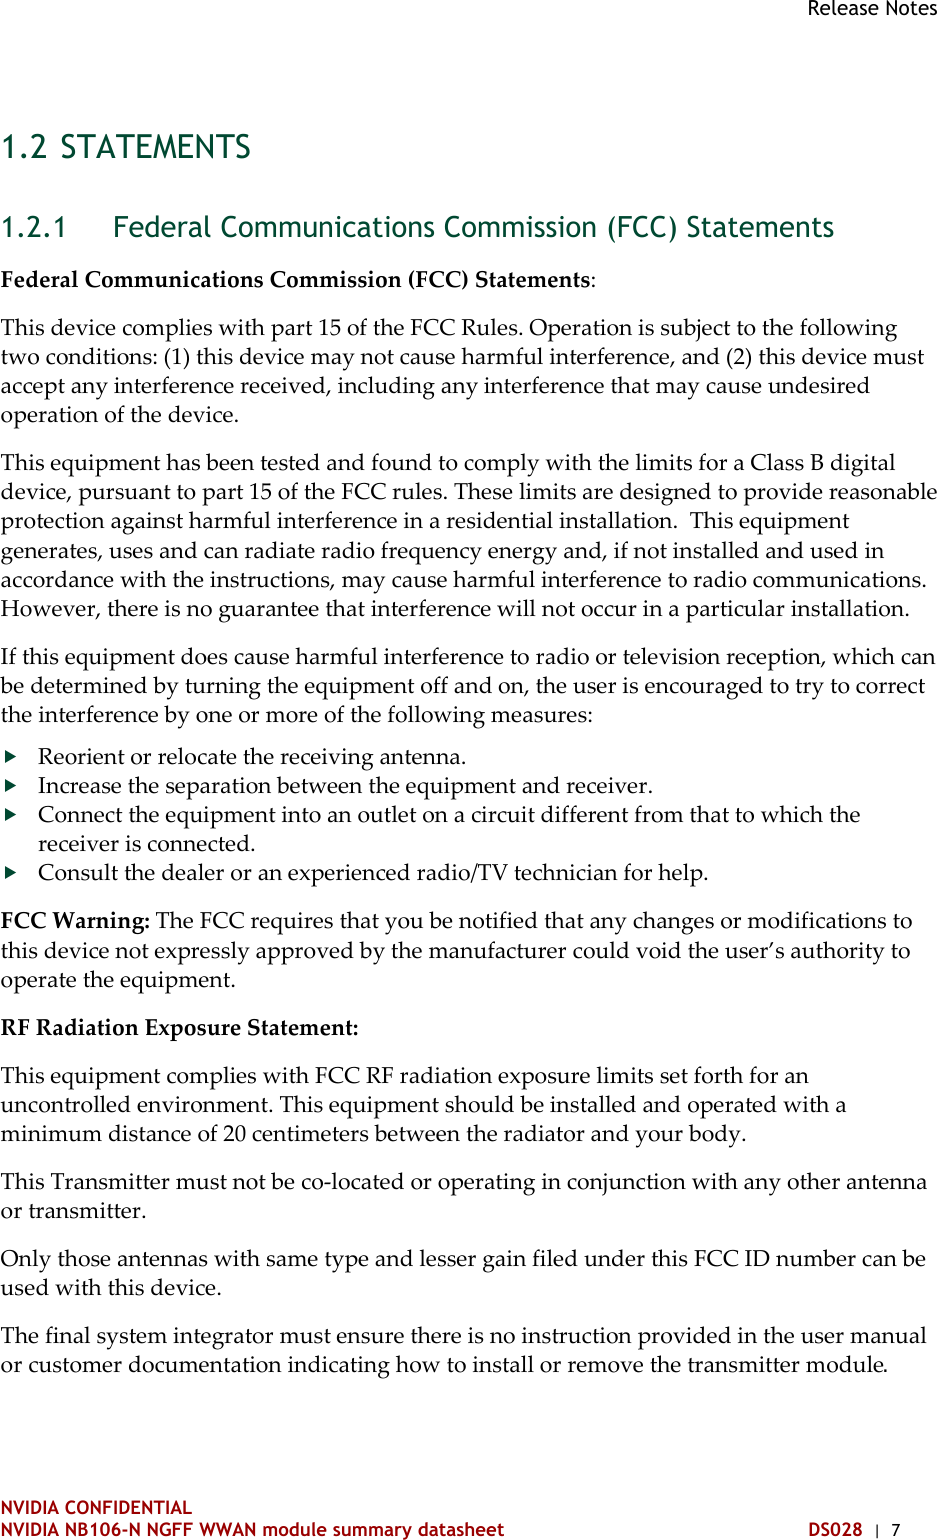 Release Notes   NVIDIA CONFIDENTIAL NVIDIA NB106-N NGFF WWAN module summary datasheet DS028  |  7 1.2 STATEMENTS  Federal Communications Commission (FCC) Statements 1.2.1Federal Communications Commission (FCC) Statements: This device complies with part 15 of the FCC Rules. Operation is subject to the following two conditions: (1) this device may not cause harmful interference, and (2) this device must accept any interference received, including any interference that may cause undesired operation of the device. This equipment has been tested and found to comply with the limits for a Class B digital device, pursuant to part 15 of the FCC rules. These limits are designed to provide reasonable protection against harmful interference in a residential installation.  This equipment generates, uses and can radiate radio frequency energy and, if not installed and used in accordance with the instructions, may cause harmful interference to radio communications. However, there is no guarantee that interference will not occur in a particular installation.  If this equipment does cause harmful interference to radio or television reception, which can be determined by turning the equipment off and on, the user is encouraged to try to correct the interference by one or more of the following measures:  Reorient or relocate the receiving antenna.  Increase the separation between the equipment and receiver.  Connect the equipment into an outlet on a circuit different from that to which the receiver is connected.  Consult the dealer or an experienced radio/TV technician for help. FCC Warning: The FCC requires that you be notified that any changes or modifications to this device not expressly approved by the manufacturer could void the user’s authority to operate the equipment. RF Radiation Exposure Statement: This equipment complies with FCC RF radiation exposure limits set forth for an uncontrolled environment. This equipment should be installed and operated with a minimum distance of 20 centimeters between the radiator and your body. This Transmitter must not be co-located or operating in conjunction with any other antenna or transmitter. Only those antennas with same type and lesser gain filed under this FCC ID number can be used with this device. The final system integrator must ensure there is no instruction provided in the user manual or customer documentation indicating how to install or remove the transmitter module.  